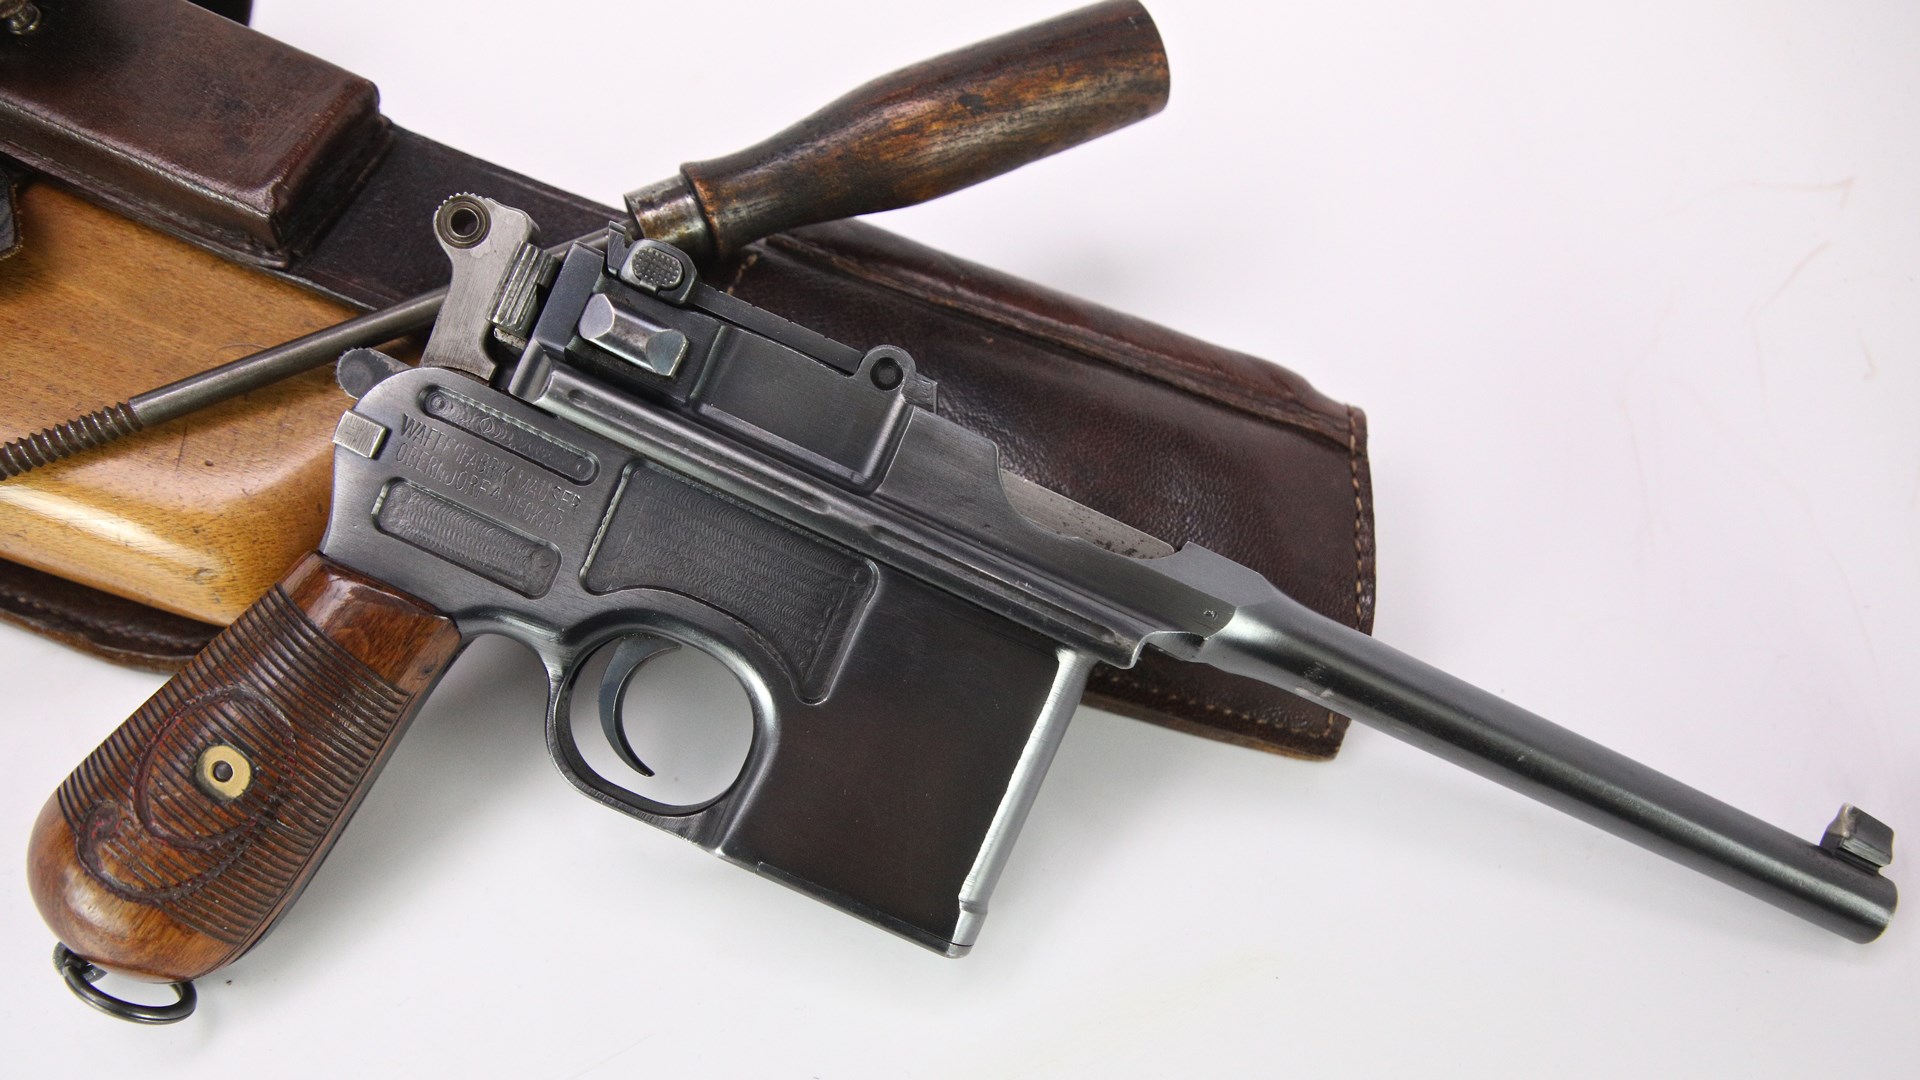 A correct WWI Mauser C96 Broomhandle Red Nine 9mm pistol with shoulder stock.